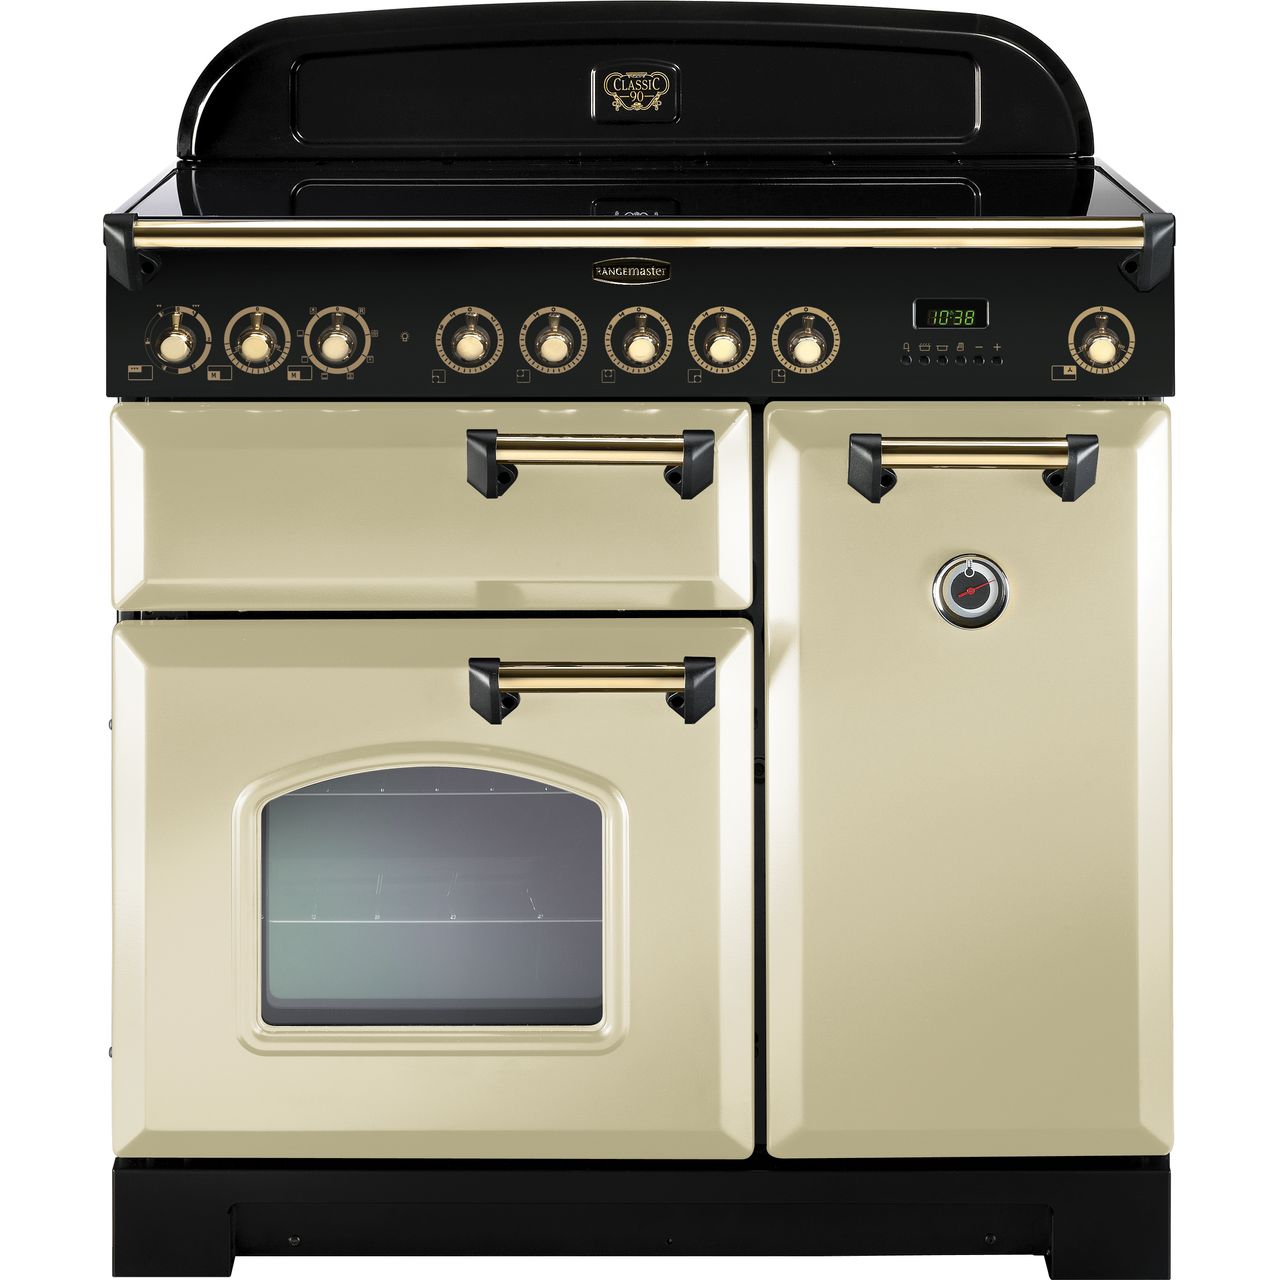 Rangemaster Classic Deluxe CDL90EICR/B 90cm Electric Range Cooker with Induction Hob - Cream / Brass - A/A Rated, Cream